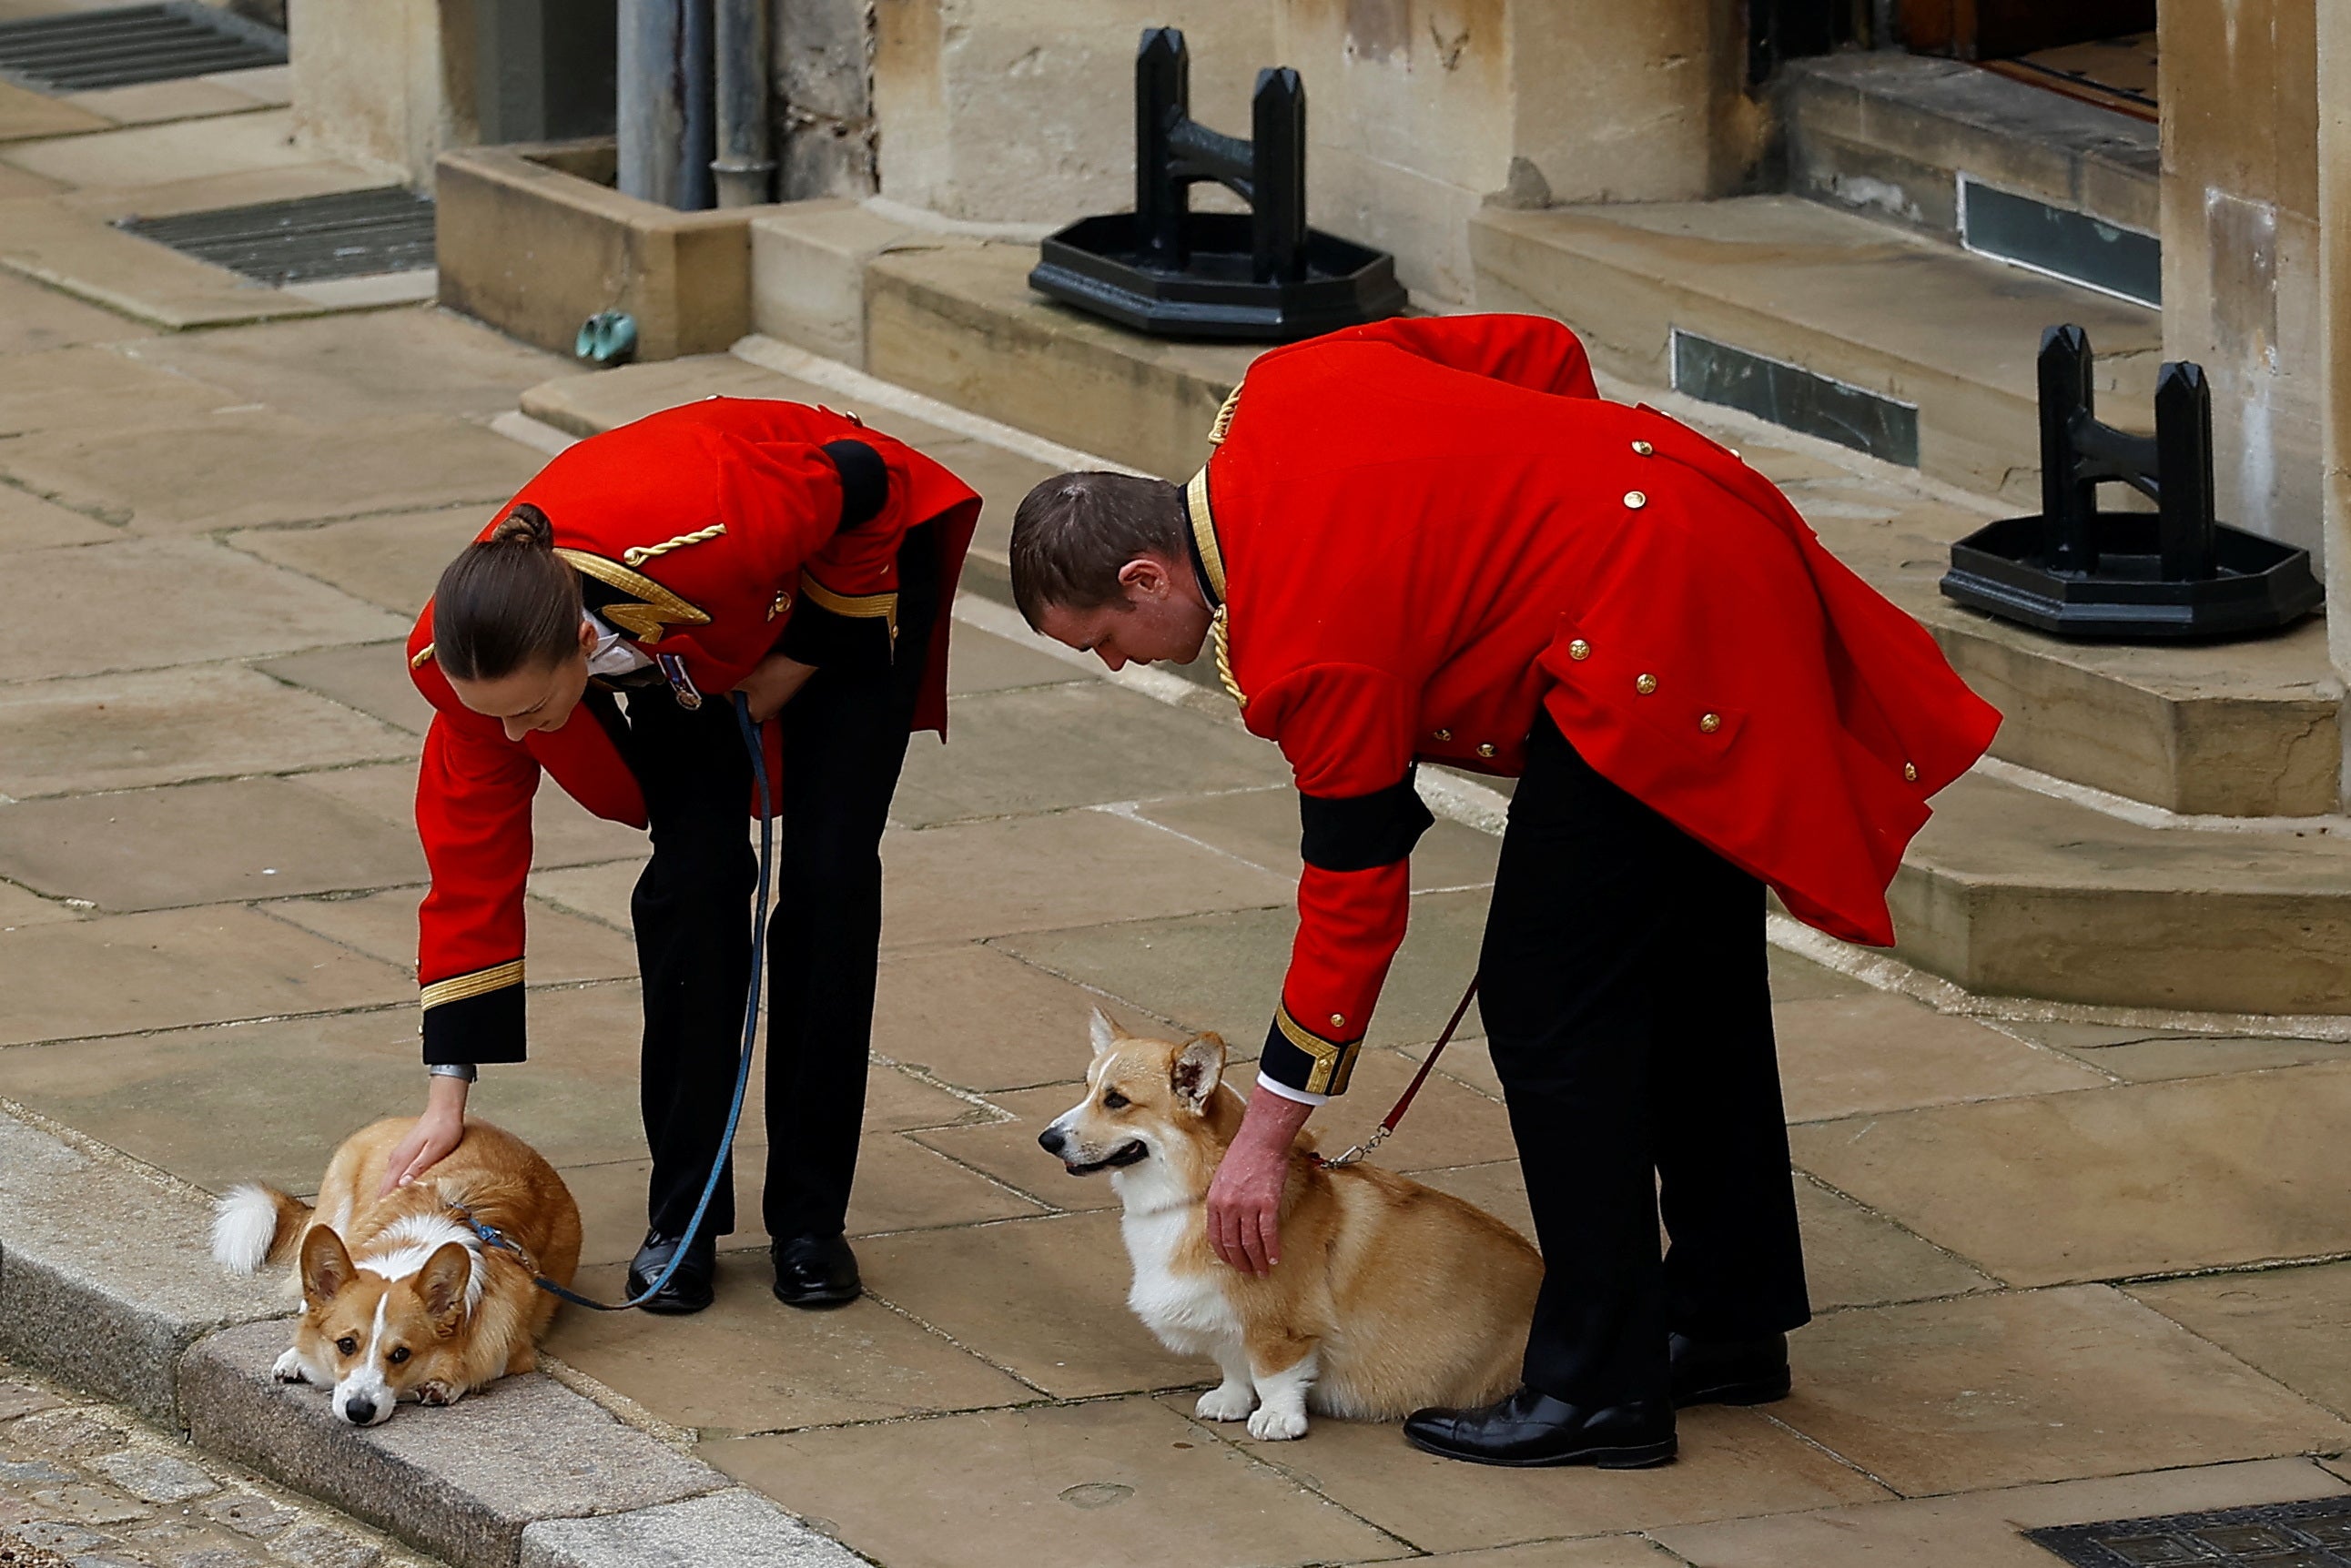 The Queen’s two corgis, Muick and Sandy, are seen during the Ceremonial Procession during the late monarch’s funeral